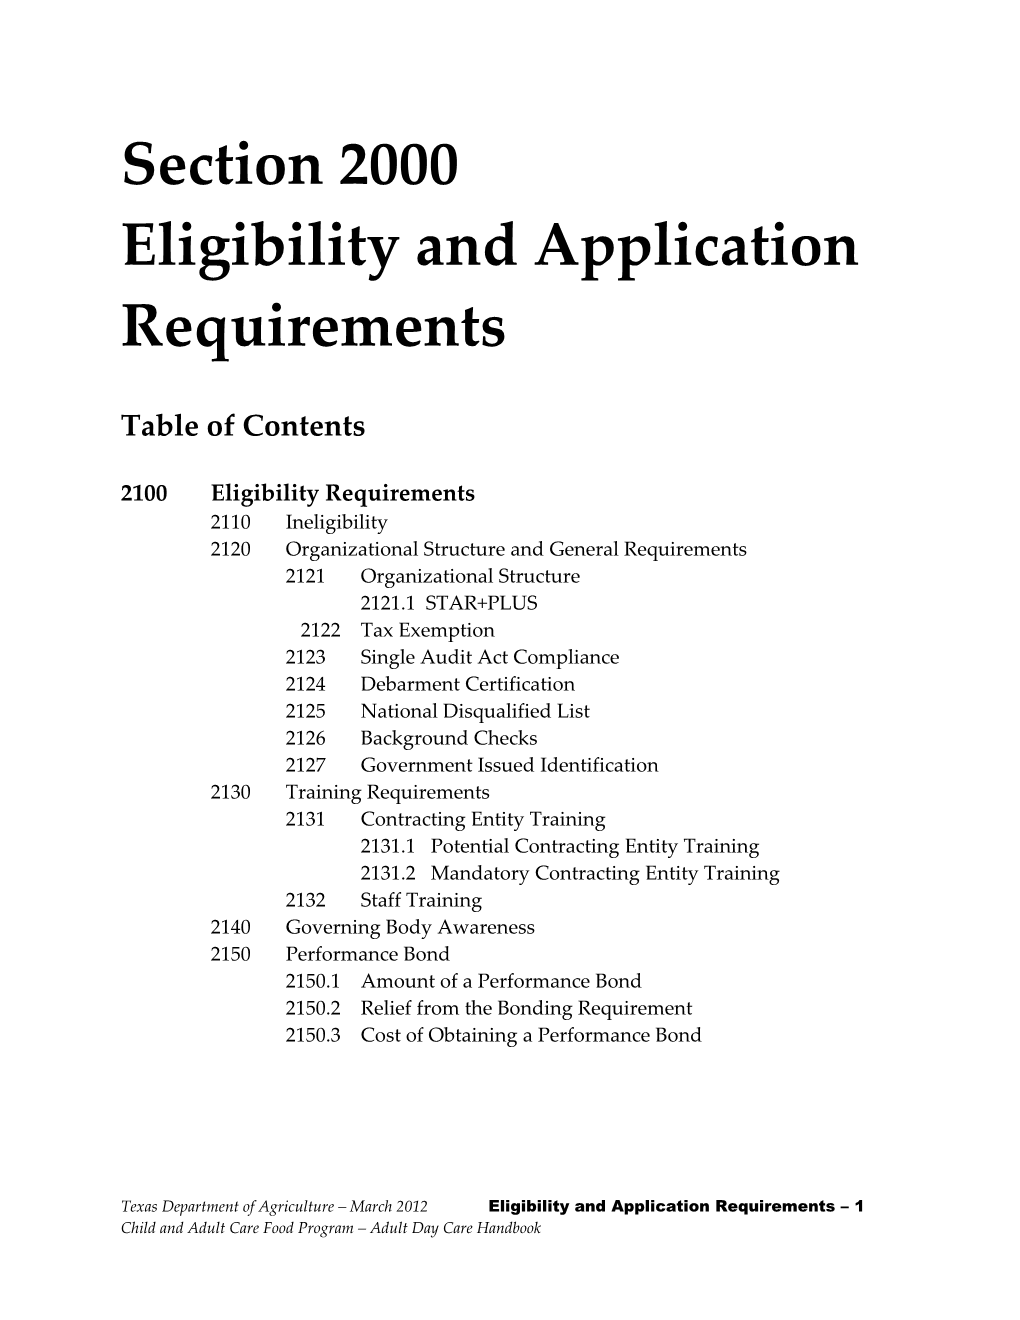 Eligibility and Application Requirements s1